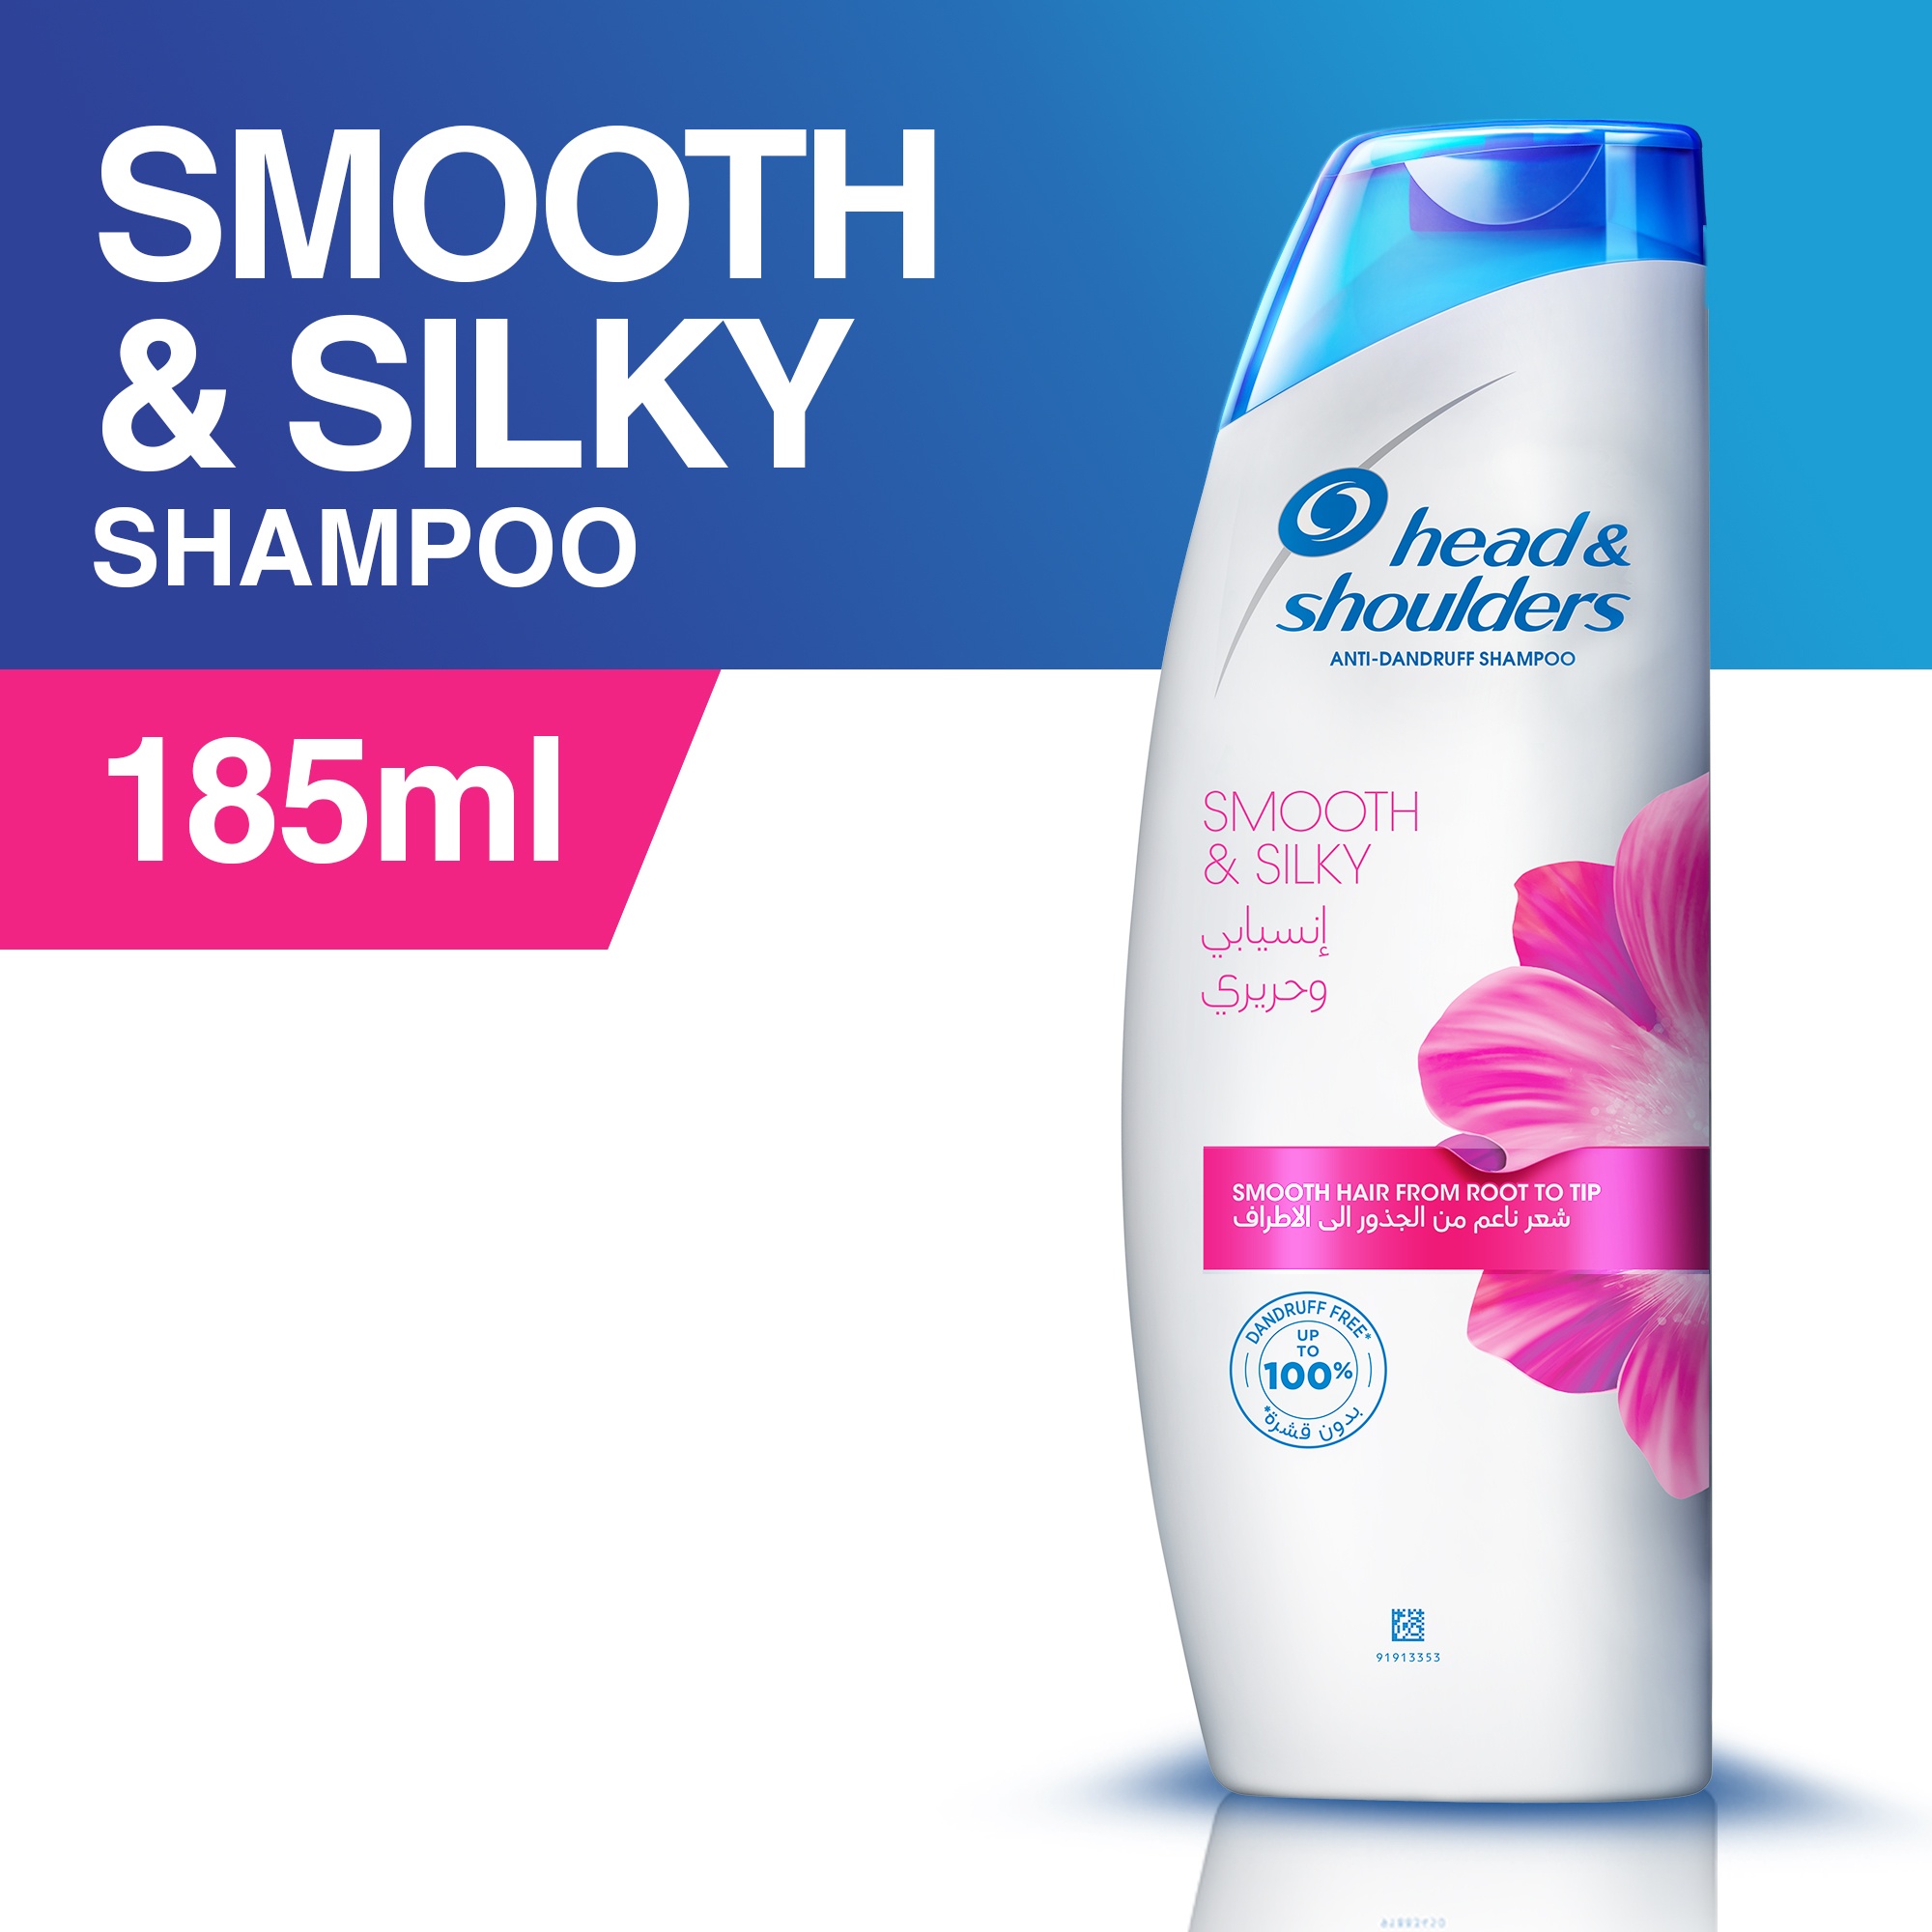 HEAD AND SHOULDERS SHAMPOO SMOOTH AND SILKY 185ml - bhaagLe